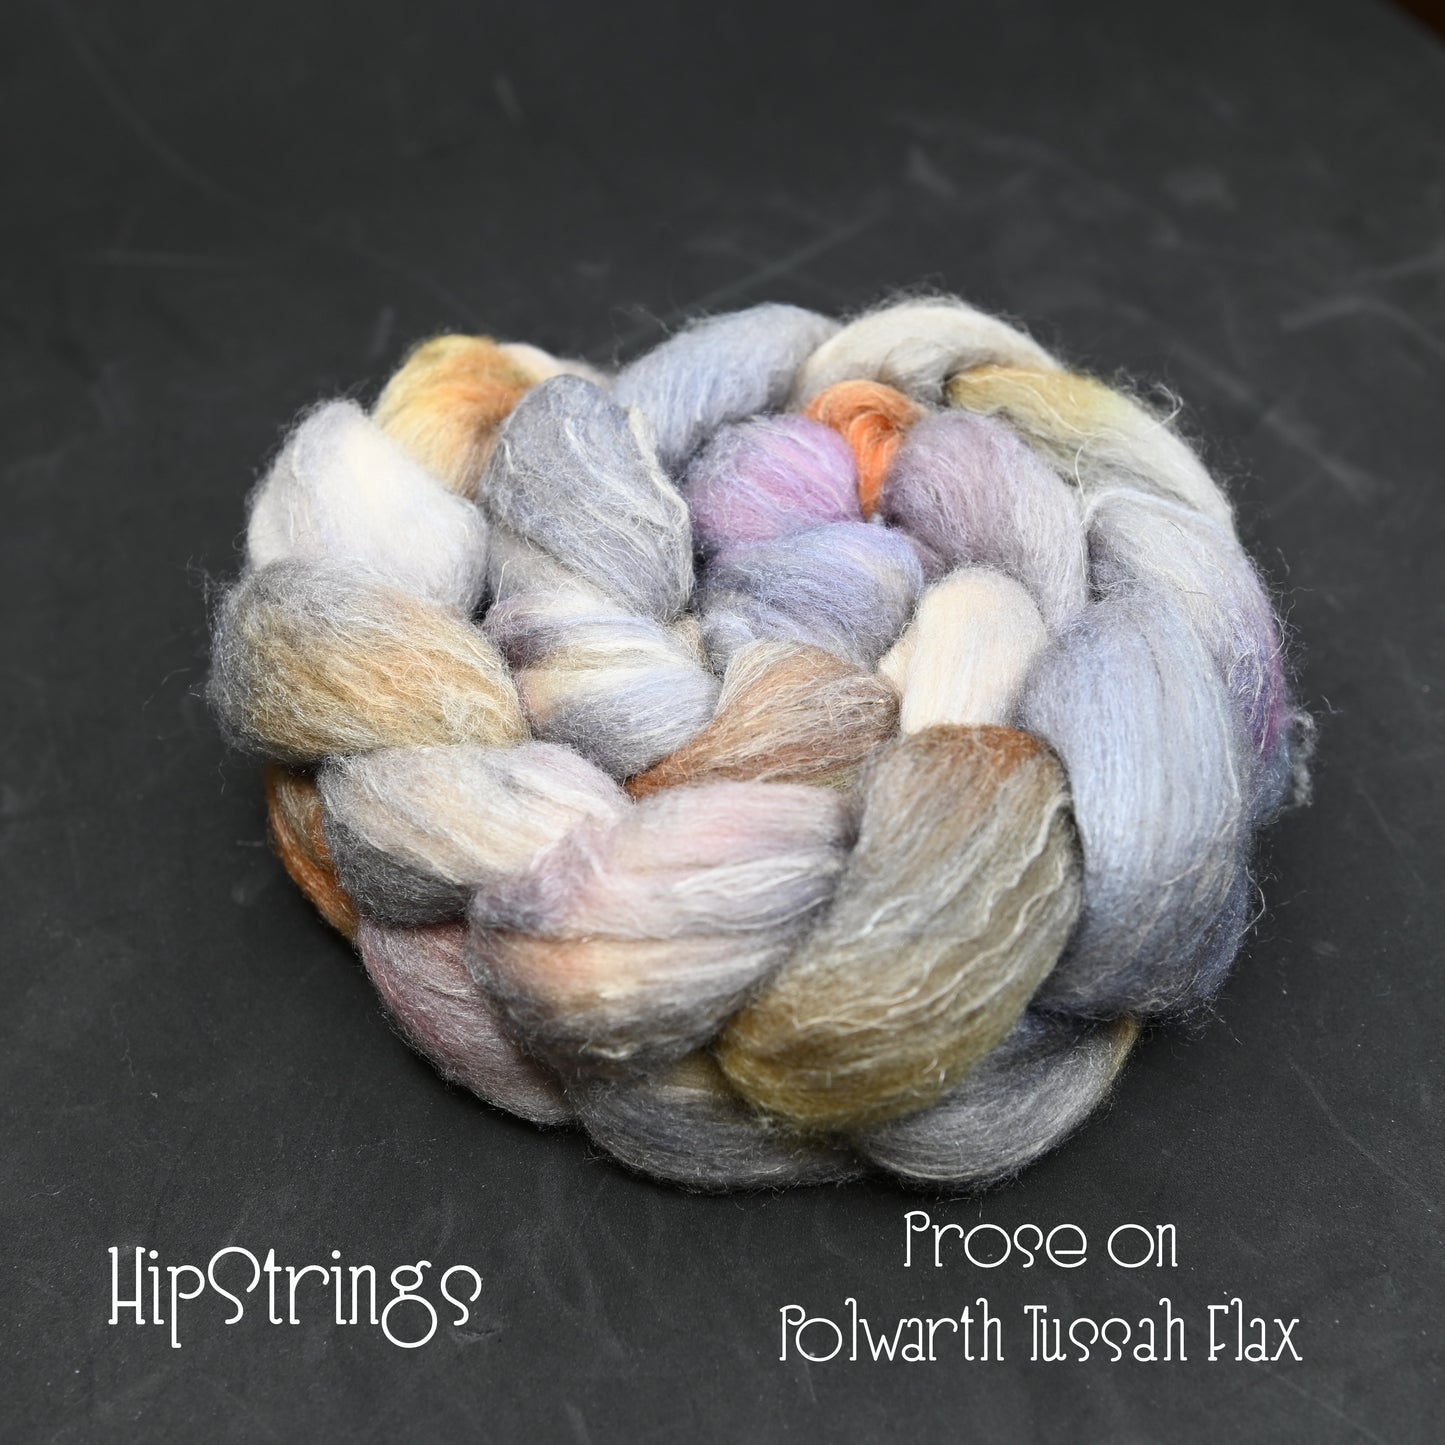 Prose on Hand Dyed Polwarth/Silk/Flax Combed Top - 4 oz